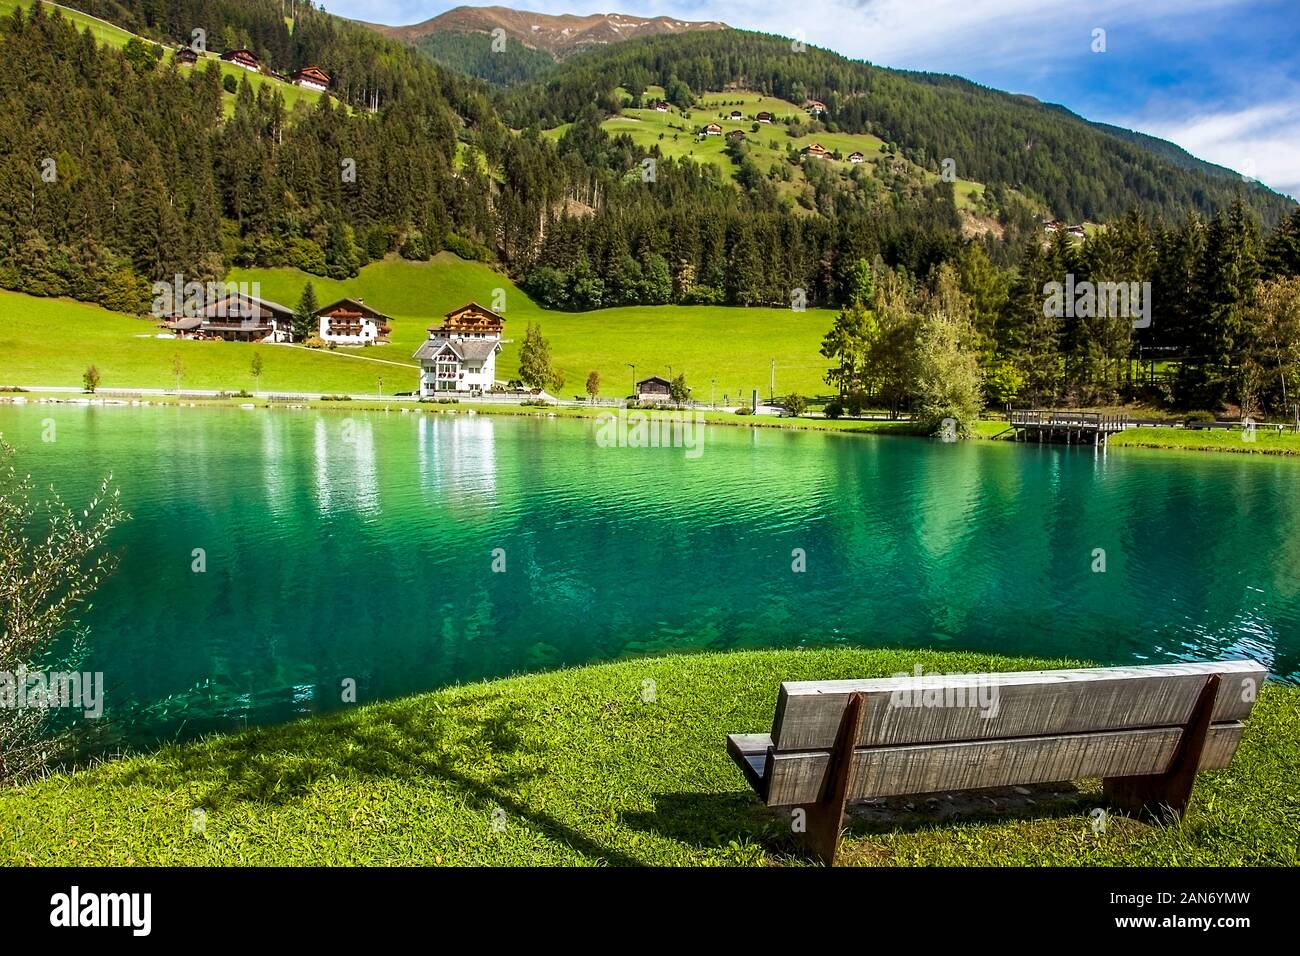 Wooden bench in front of the Mühlwald reservoir in Mühlwald South Tyrol Italy Stock Photo